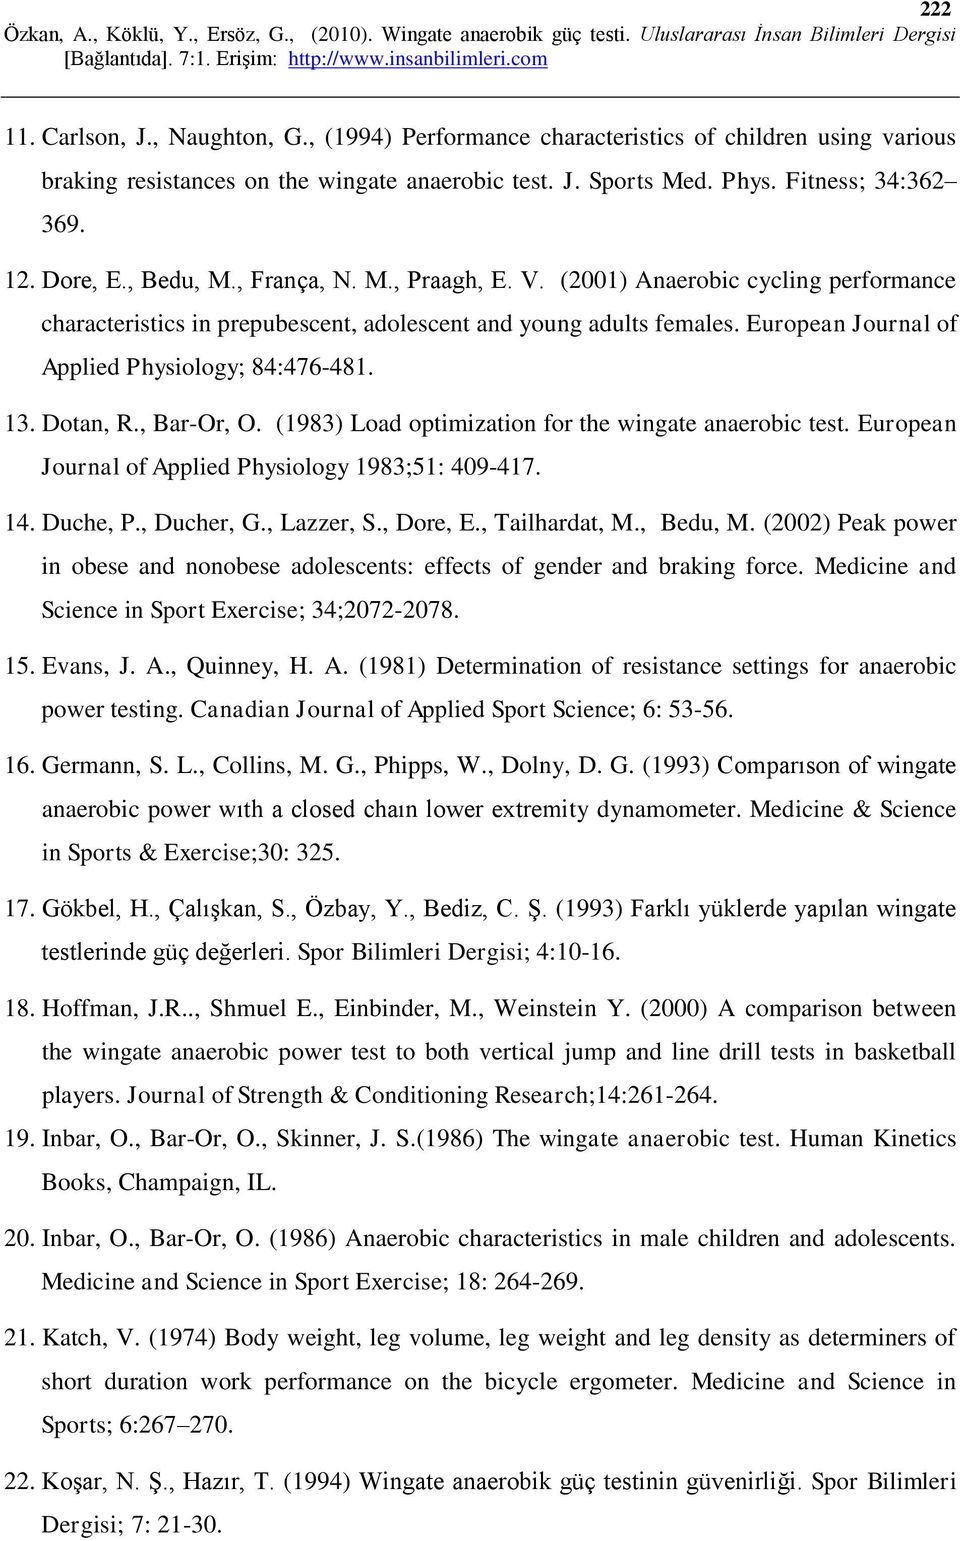 European Journal of Applied Physiology; 84:476-481. 13. Dotan, R., Bar-Or, O. (1983) Load optimization for the wingate anaerobic test. European Journal of Applied Physiology 1983;51: 409-417. 14.